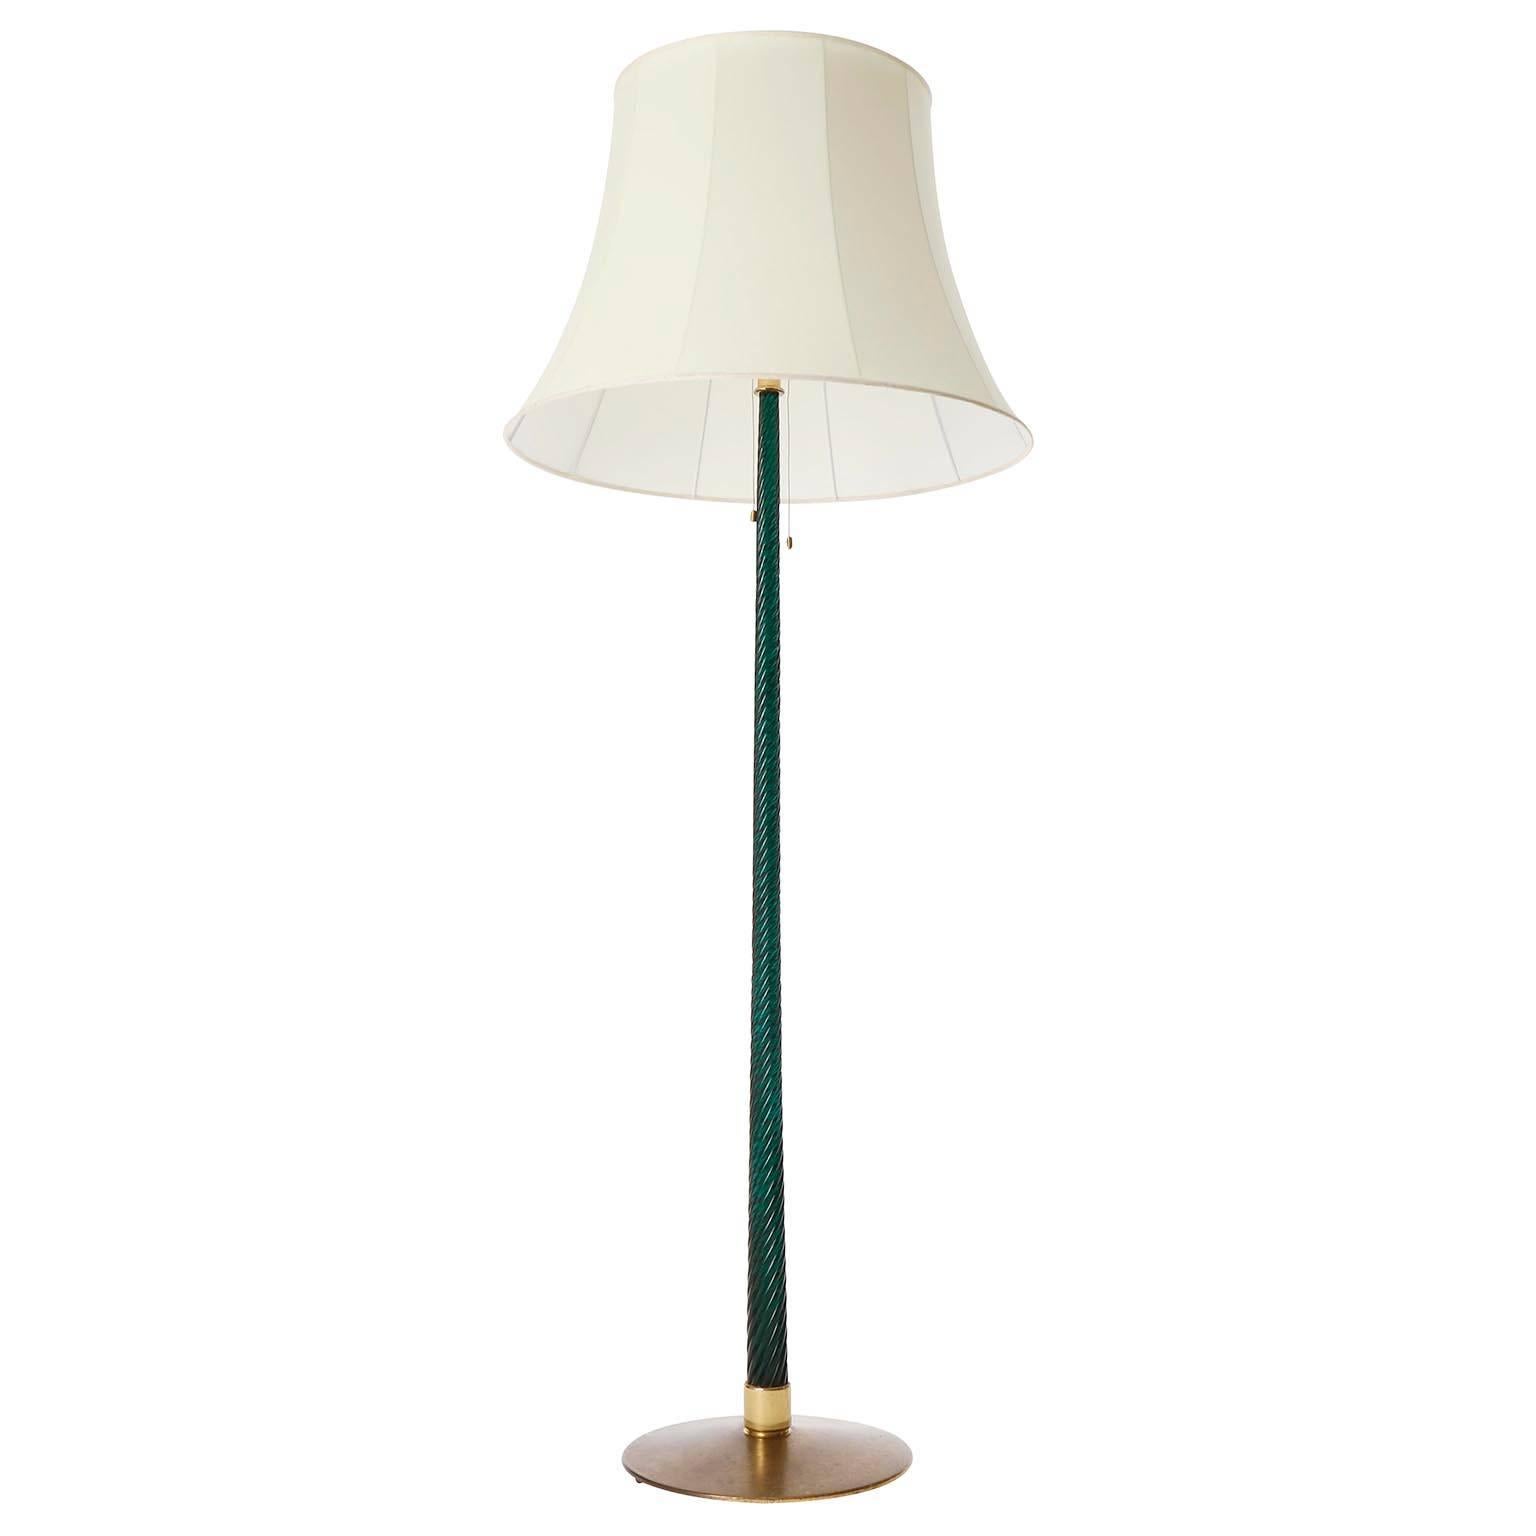 A fantastic and rare floor lamp 'Glasschaft' (engl. 'glass rod'), no. 2134 by J.T. Kalmar, Austria, Vienna, manufactured in Mid-Century, circa 1960.
The stand is made of an emerald green twisted Murano glass rod which was produced in Italy by